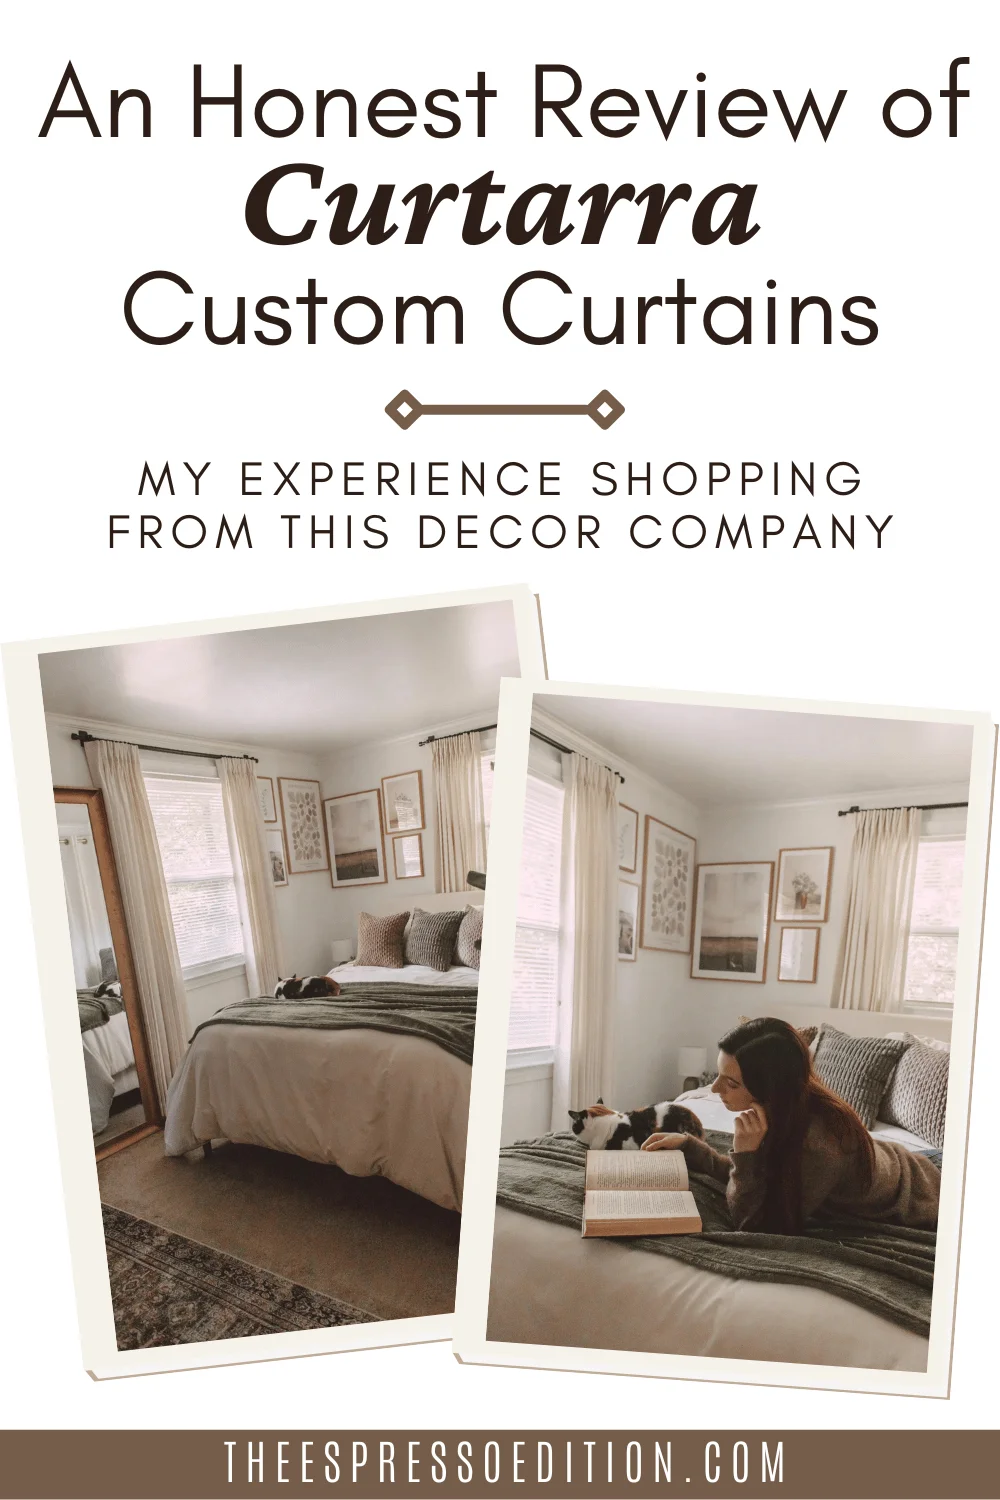 An Honest Review of Curtarra Custom Curtains by The Espresso Edition cozy lifestyle blog